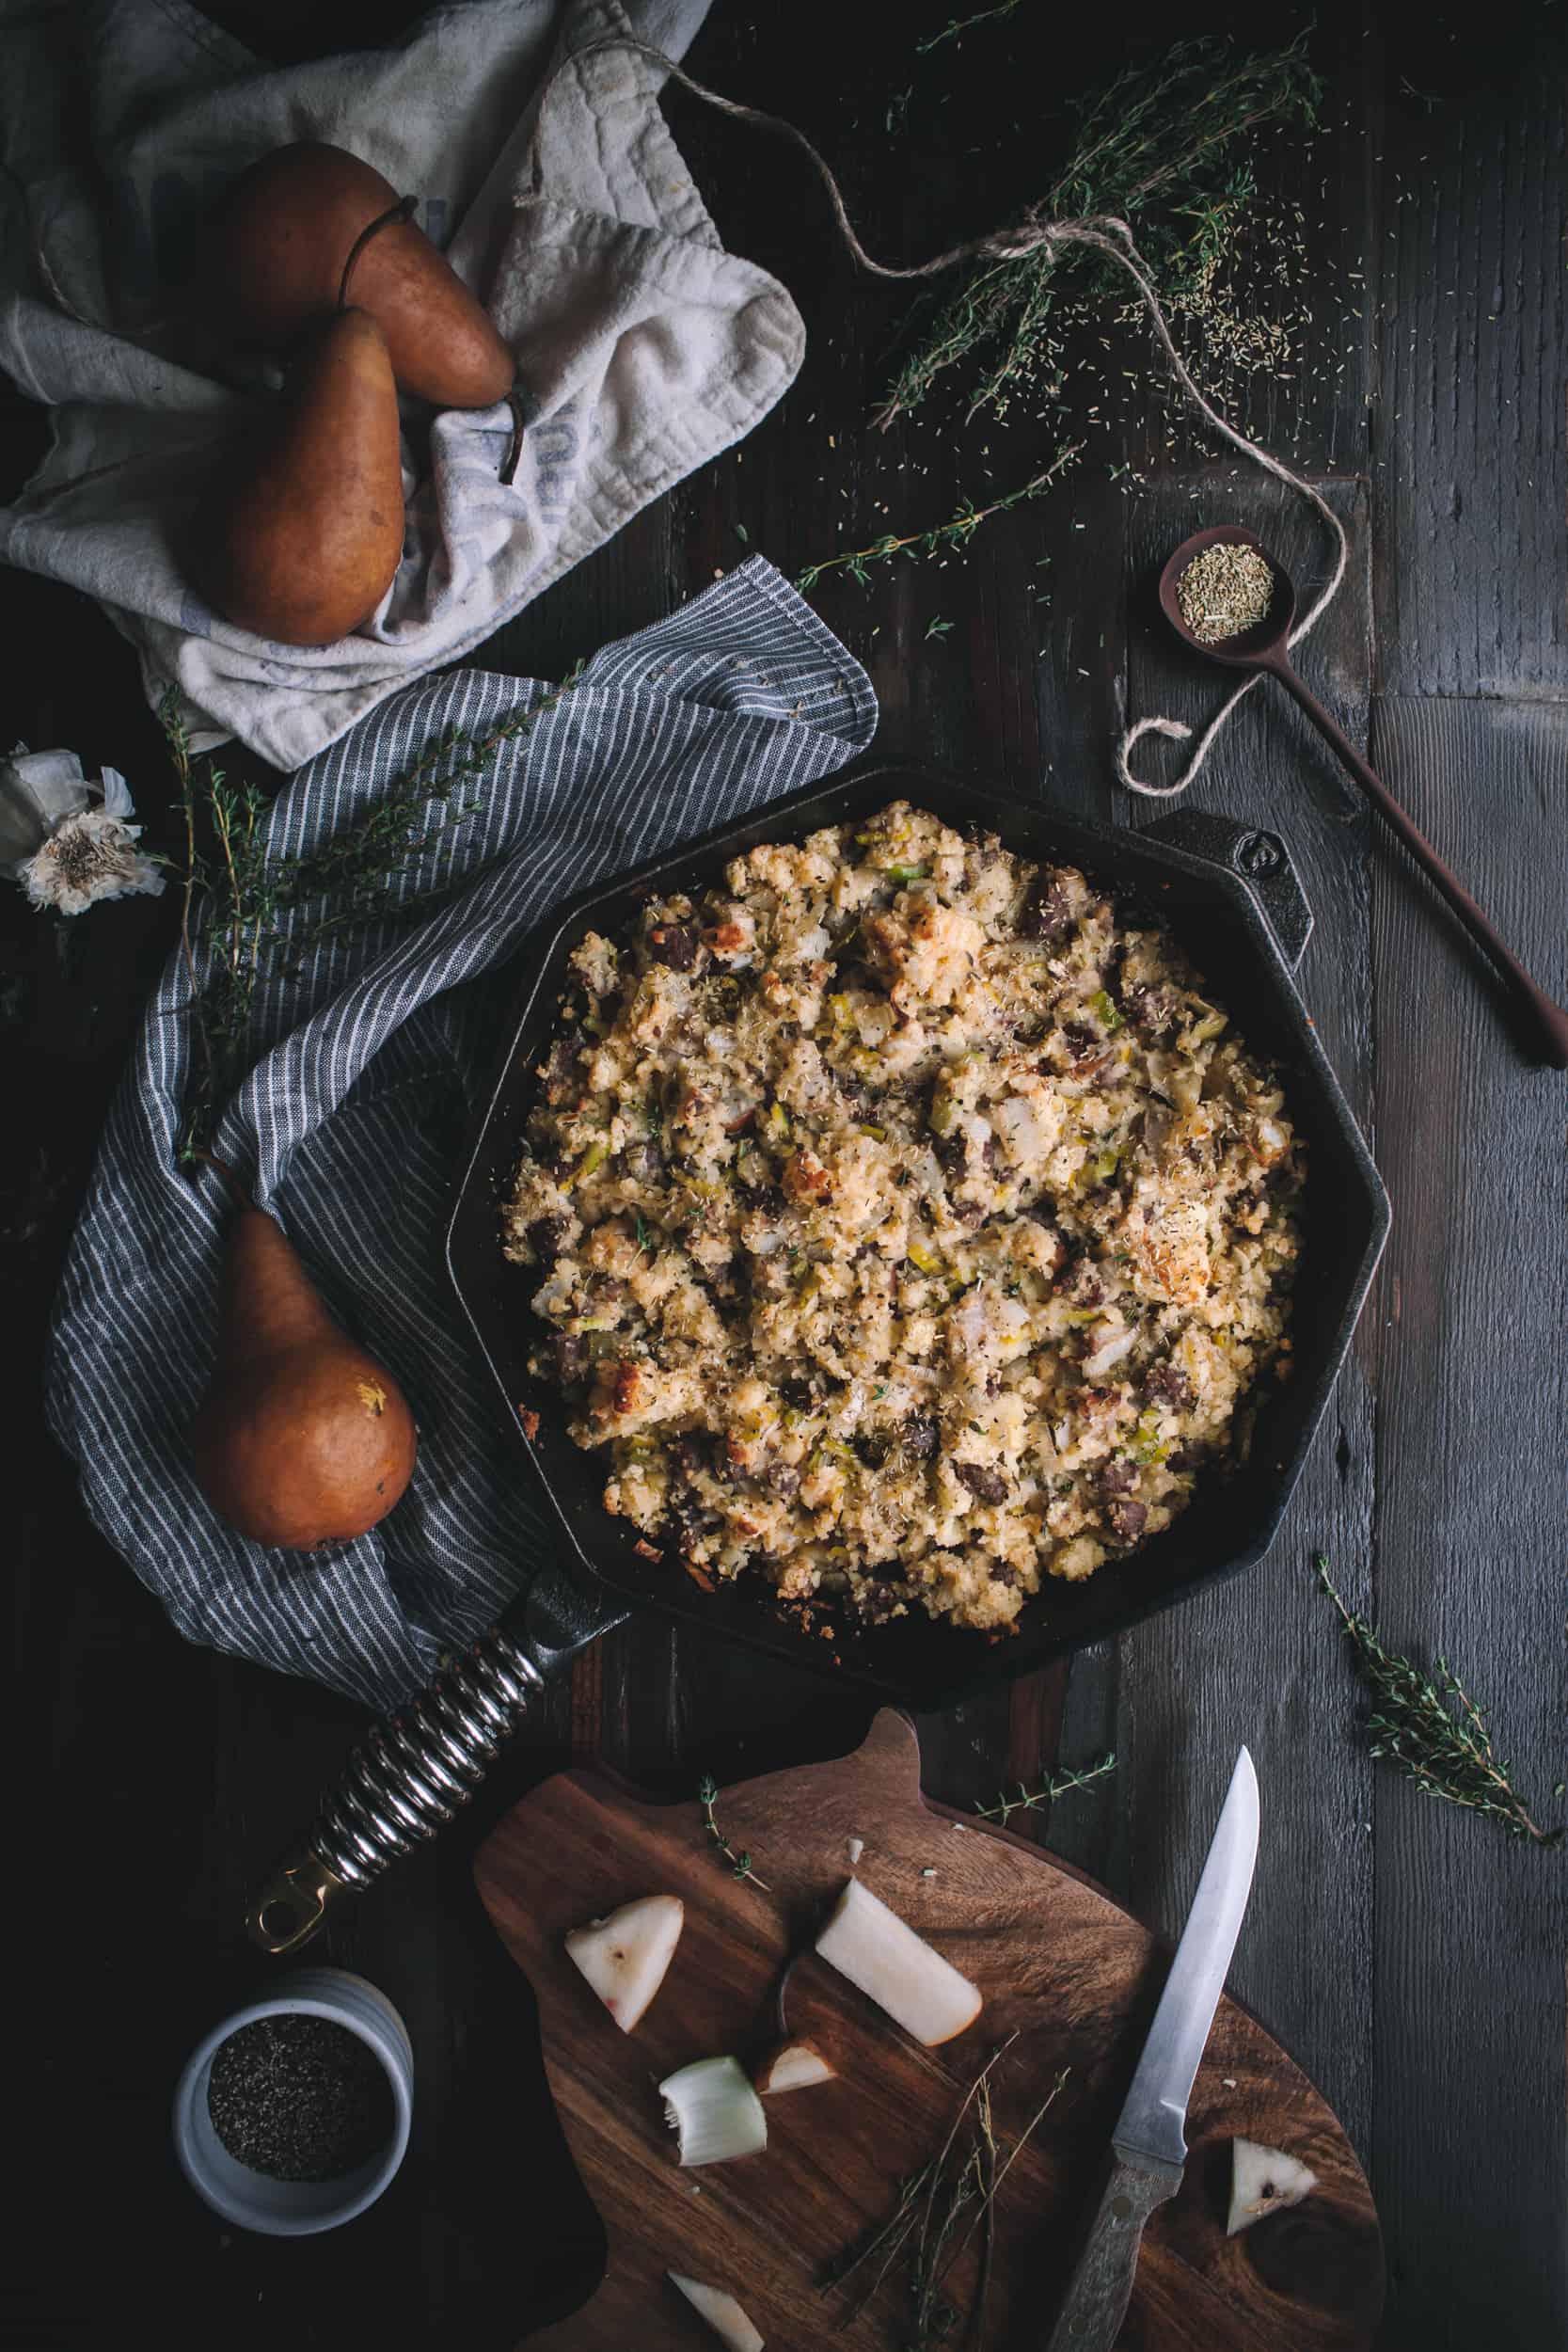 Cast Iron Cornbread Stuffing with Leeks Sausage and Pears by Eva Kosmas Flores